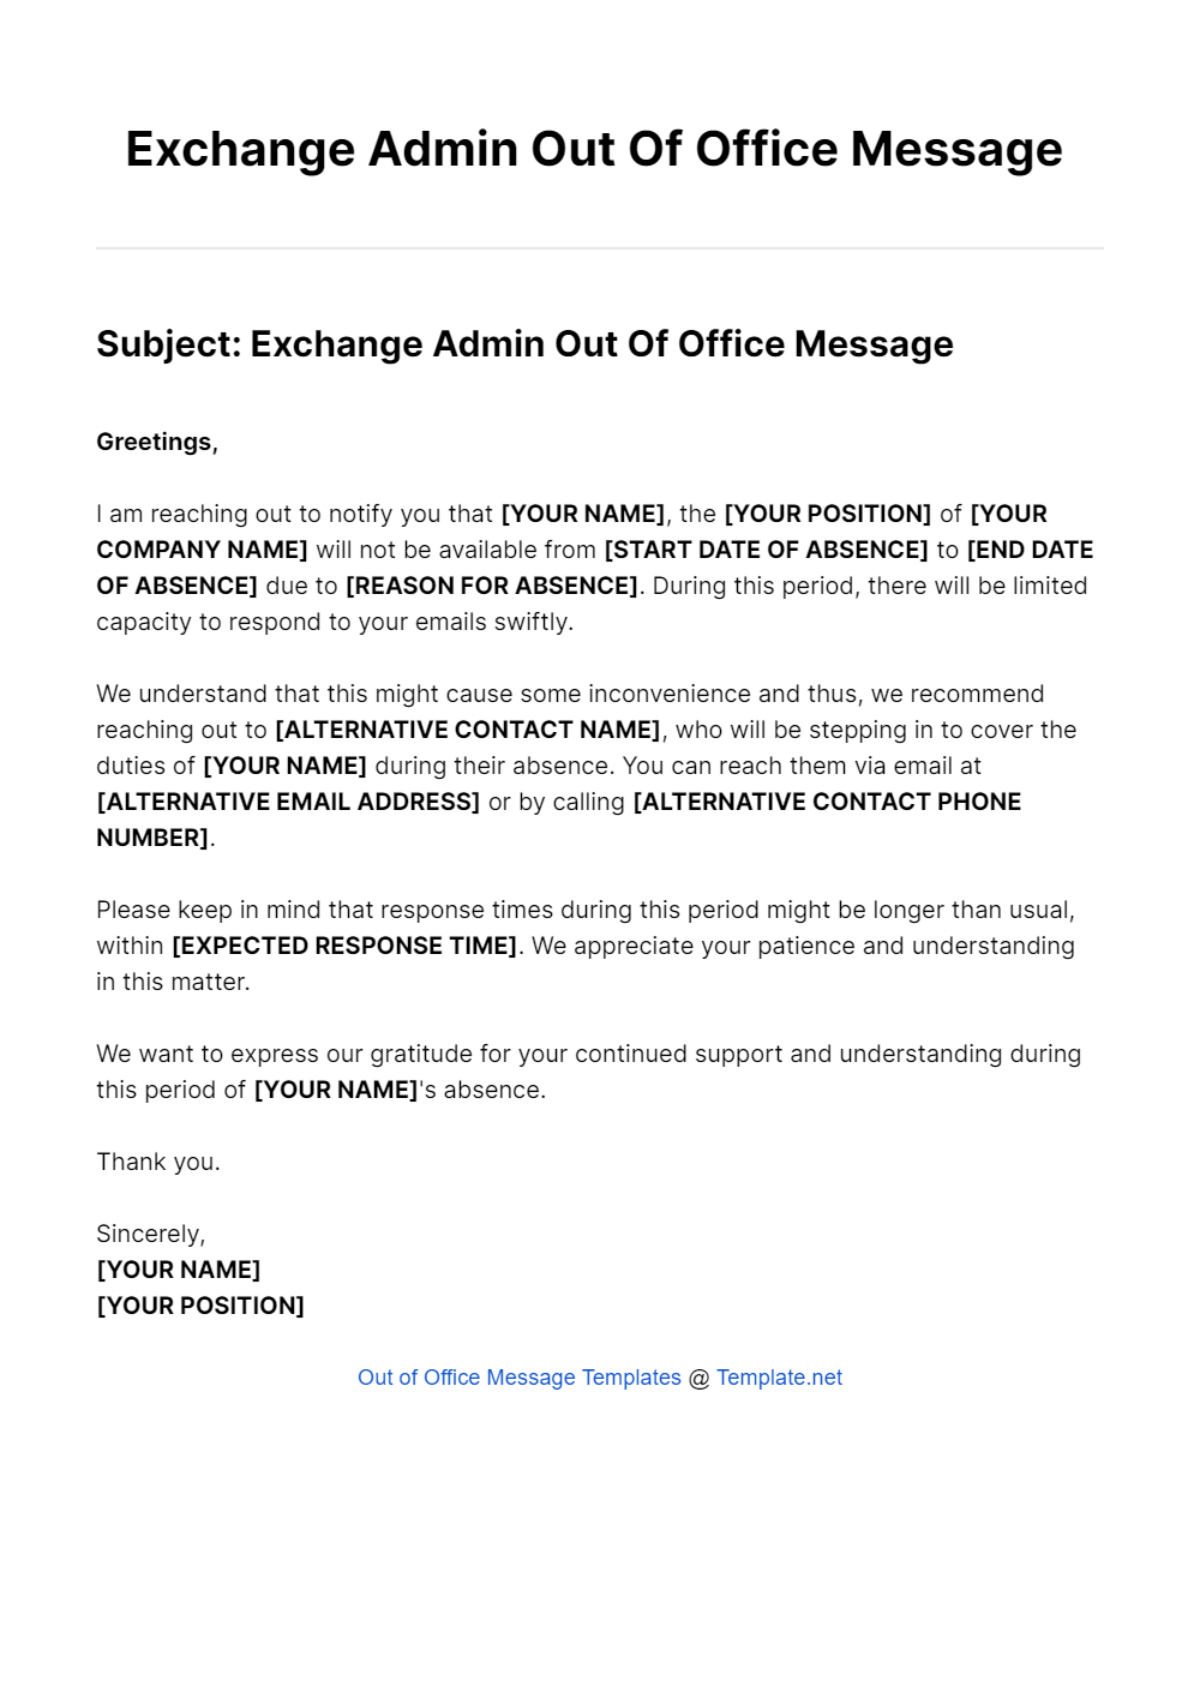 Exchange Admin Out Of Office Message Template